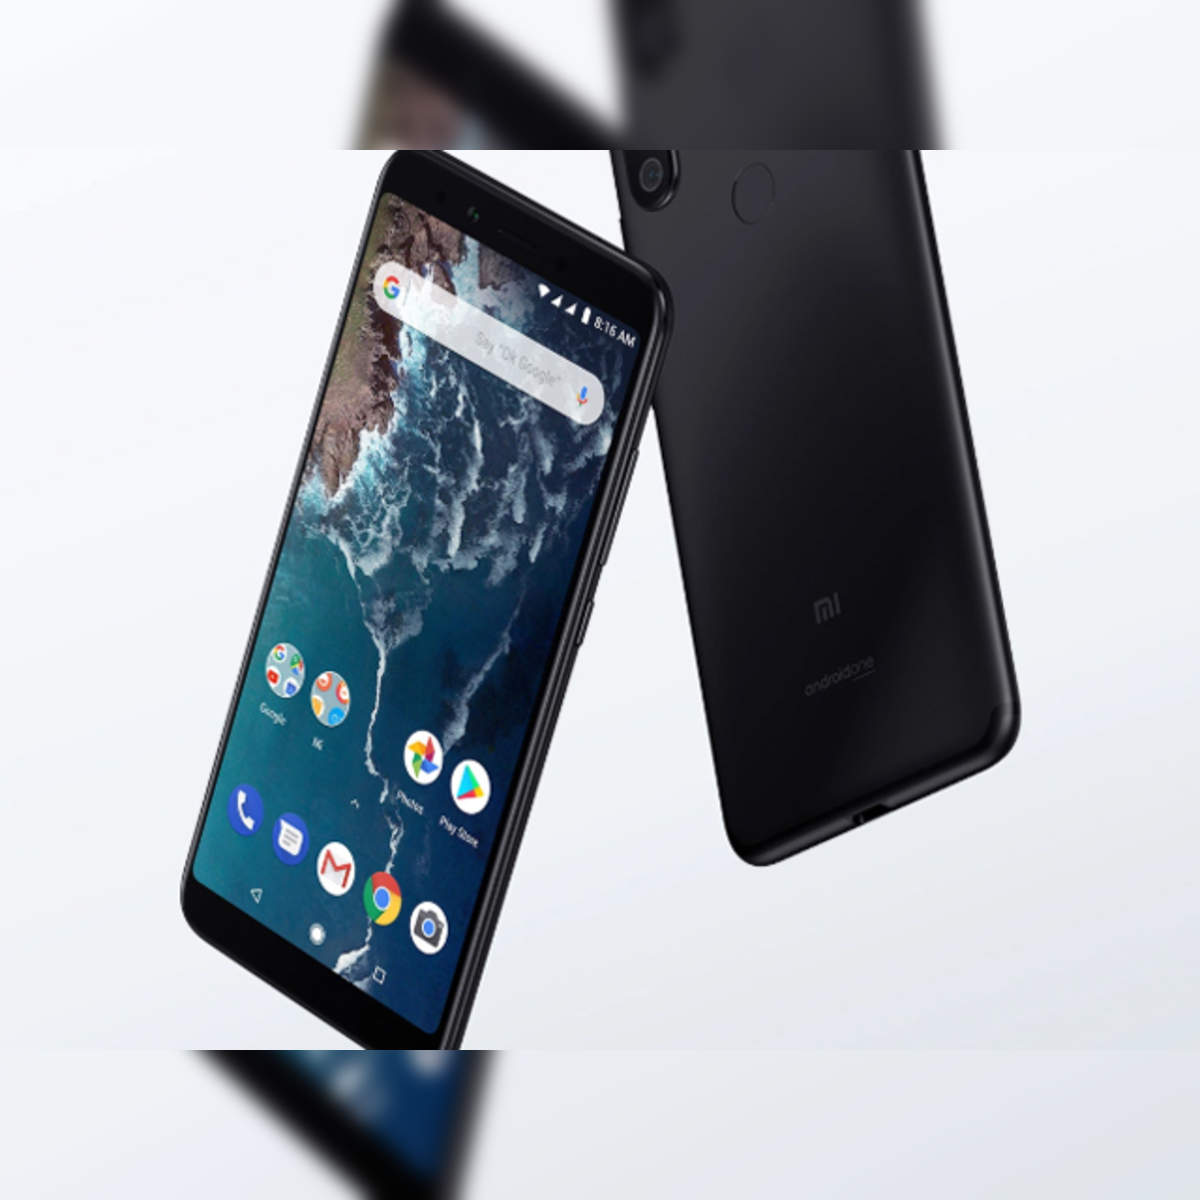 mi a2: Xiaomi Mi A2 and Mi A2 Lite Android One leaked online ahead of July  24 launch - The Economic Times